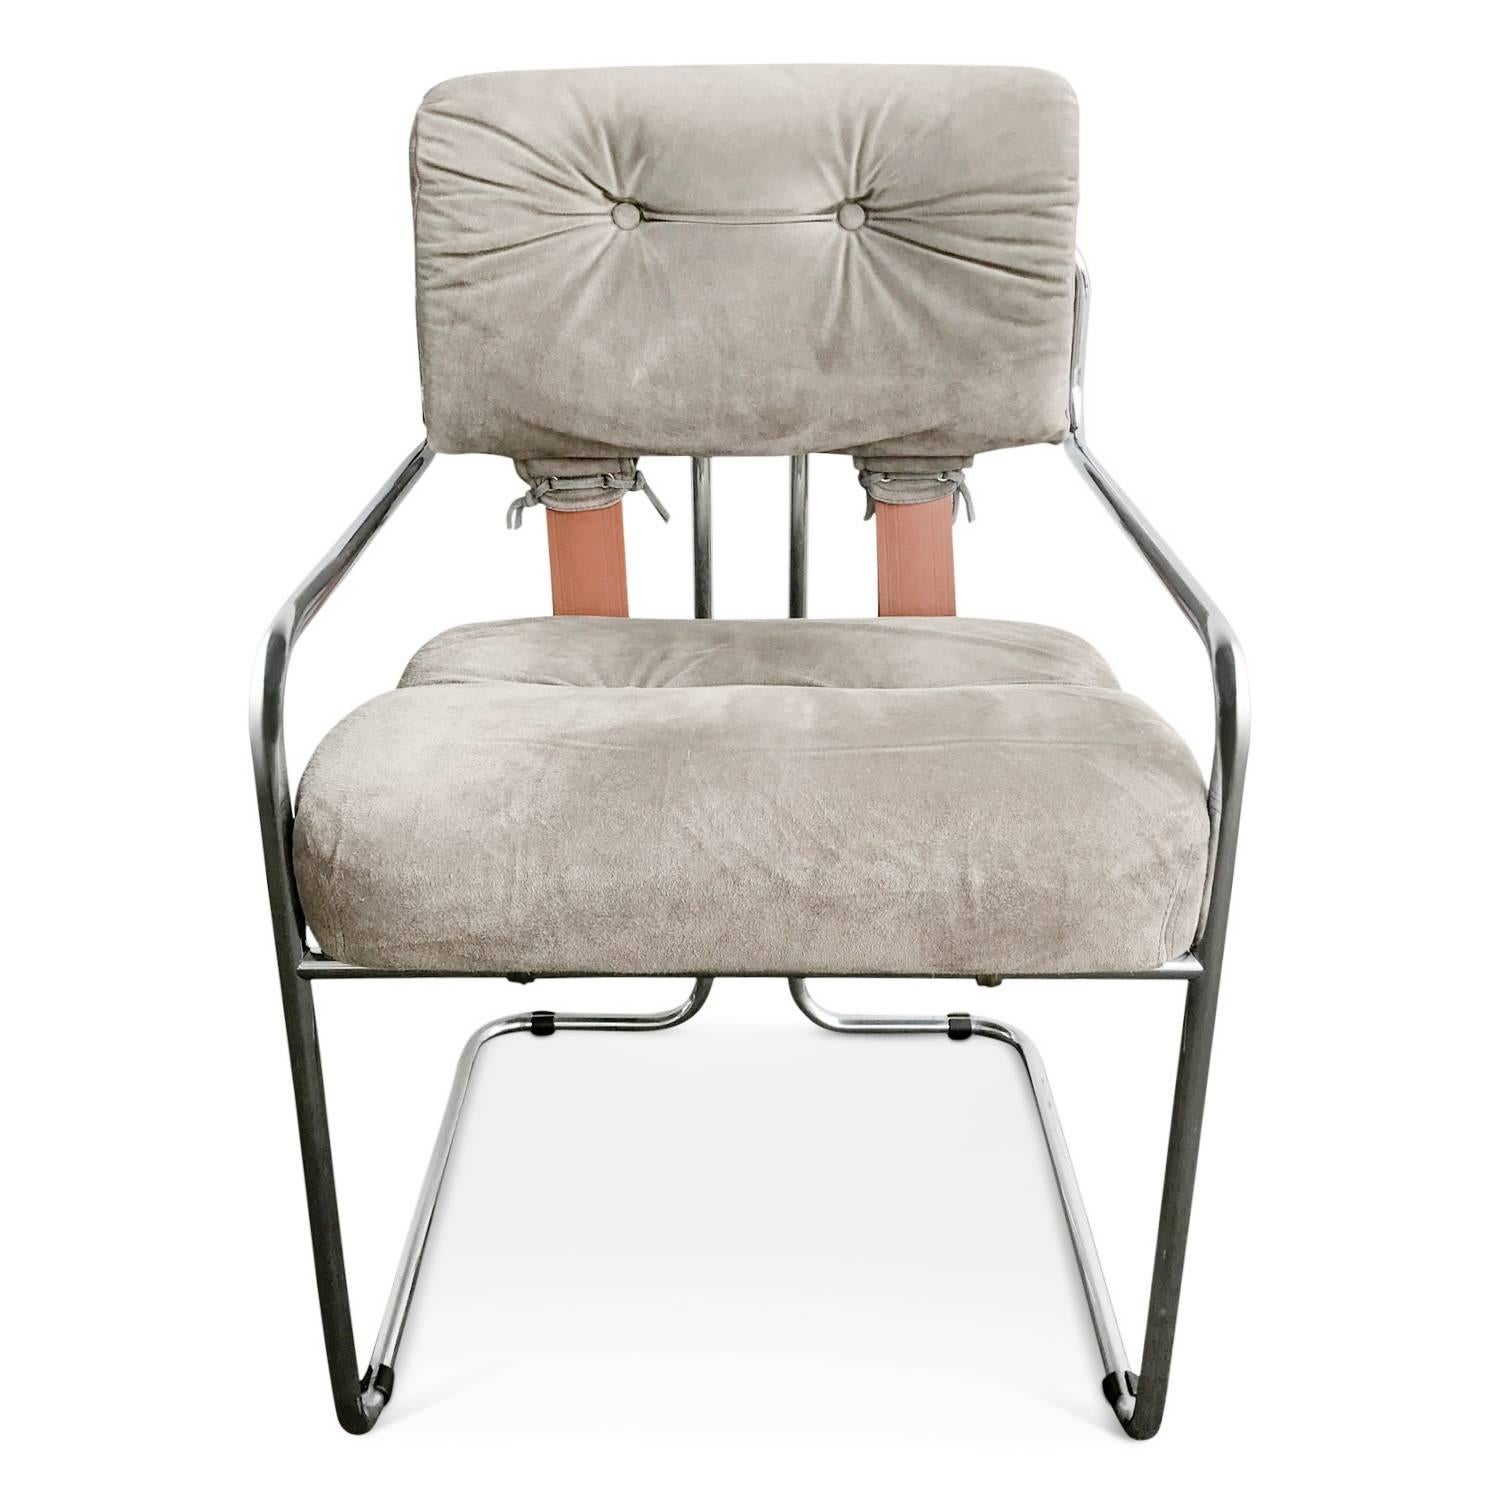 Set of two (2) elegant Guido Faleschini Tucroma chairs by i4 Mariani for The Pace Collection. The seats and backs retain the original light gray suede leather upholstery and are attached to graceful chromed steel tubular frames, as well as being